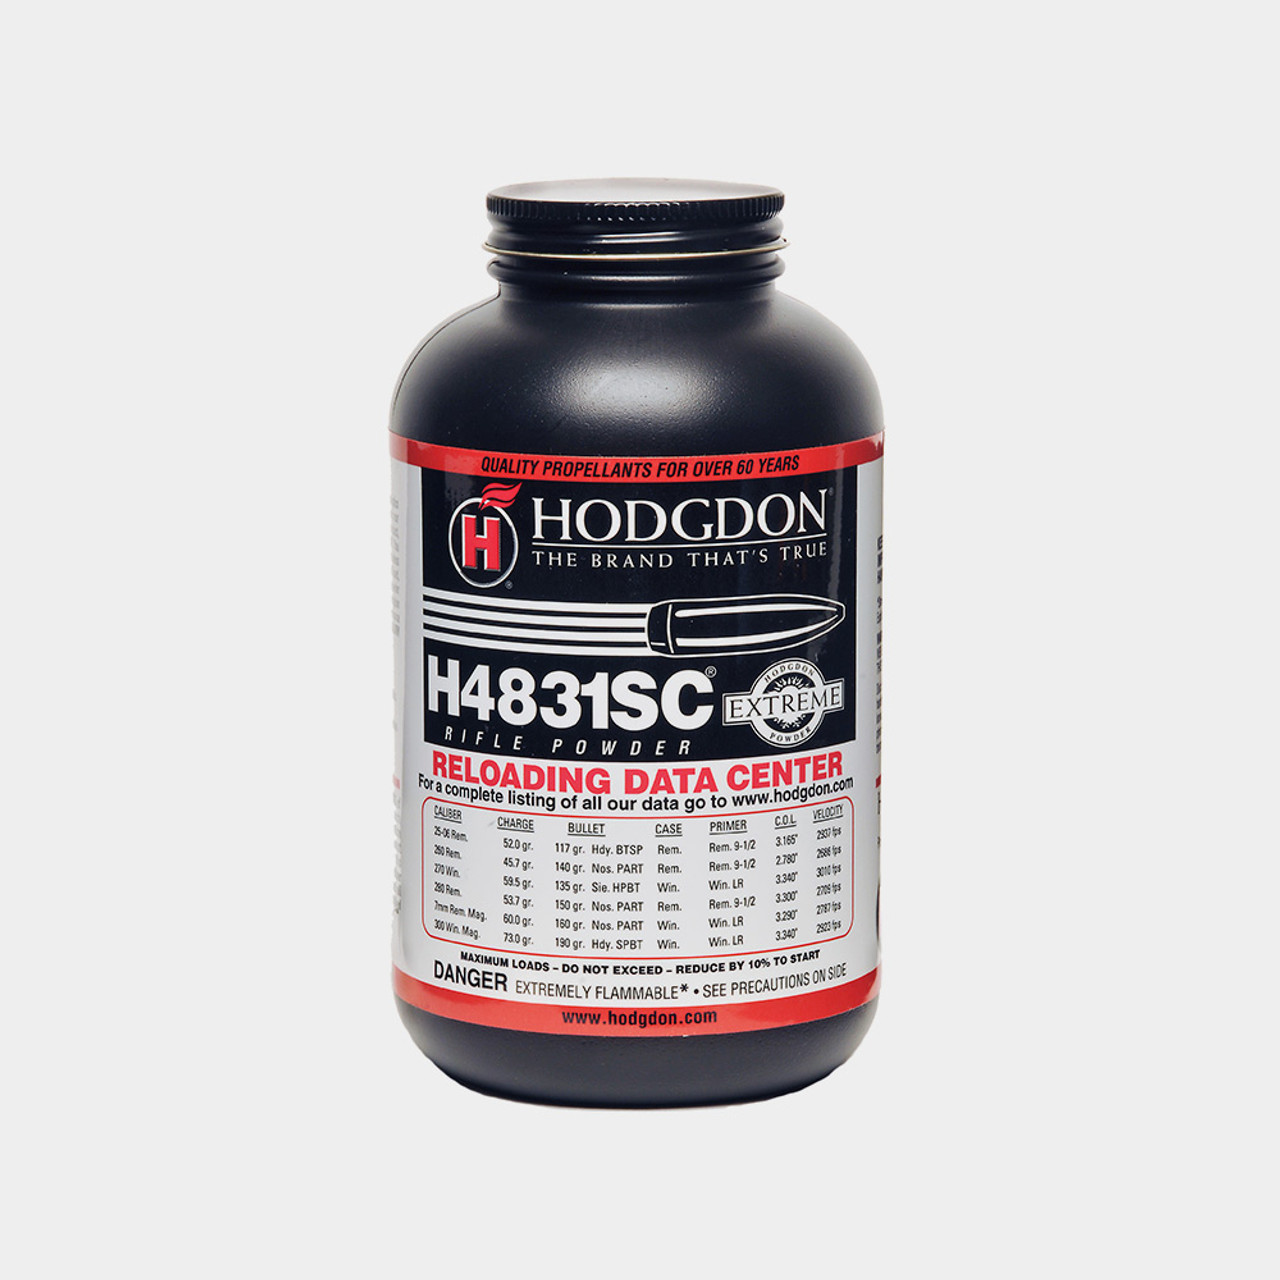 H4831SC
An extruded powder in Hodgdon’s Extreme series, it is probably safe to say more big-game animals have been taken by handloaders with H4831 than any other powder.

Bruce “B.E.” Hodgdon was the first to introduce this popular propellant in 1950 and, since that time, it has become a favorite for cartridges like the 270 Winchester, 25-06 Remington, 280 Remington and 300 Winchester Magnum.

For H4831SC, this Extreme extruded powder is the exact ballistic copy of H4831. Physically, it has a shorter grain size which earned it the “SC” designation for “short cut.” The shorter, more compact kernels allow the powder to flow through the powder measures more smoothly, helping to alleviate the constant cutting of granules. With the smoother flow characteristics comes more uniform charge weights, while the individual grains orient more compactly, creating better loading density.

As an Extreme extruded propellant, it shares the fine quality of insensitivity to hot and cold temperatures, as well as superb uniformity from lot to lot.